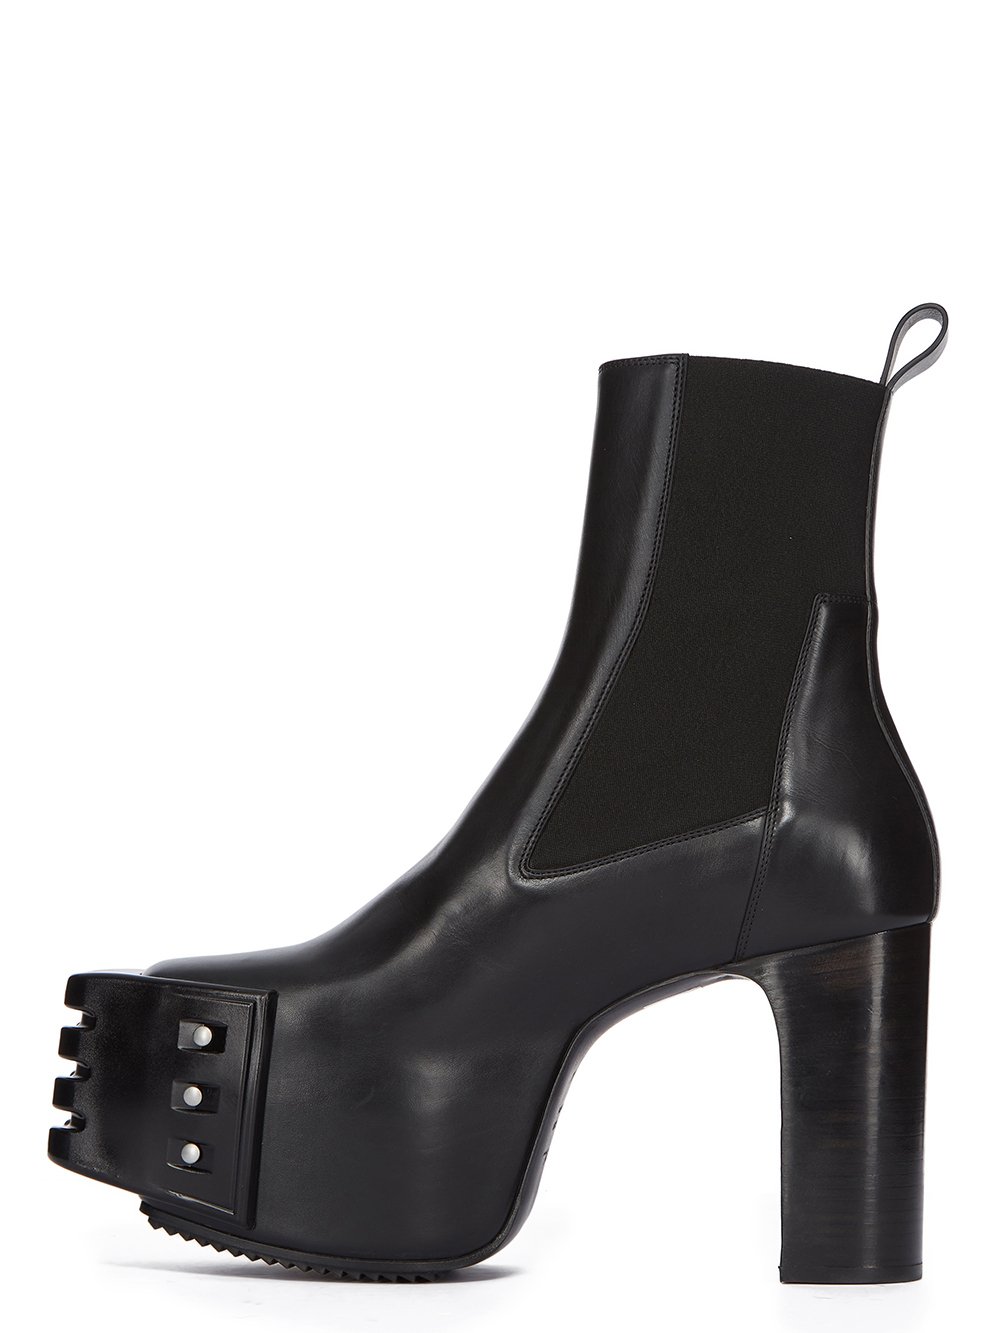 RICK OWENS FW23 LUXOR GRILLED PLATFORMS 45 IN BLACK CORTINA GREASE CALF LEATHER